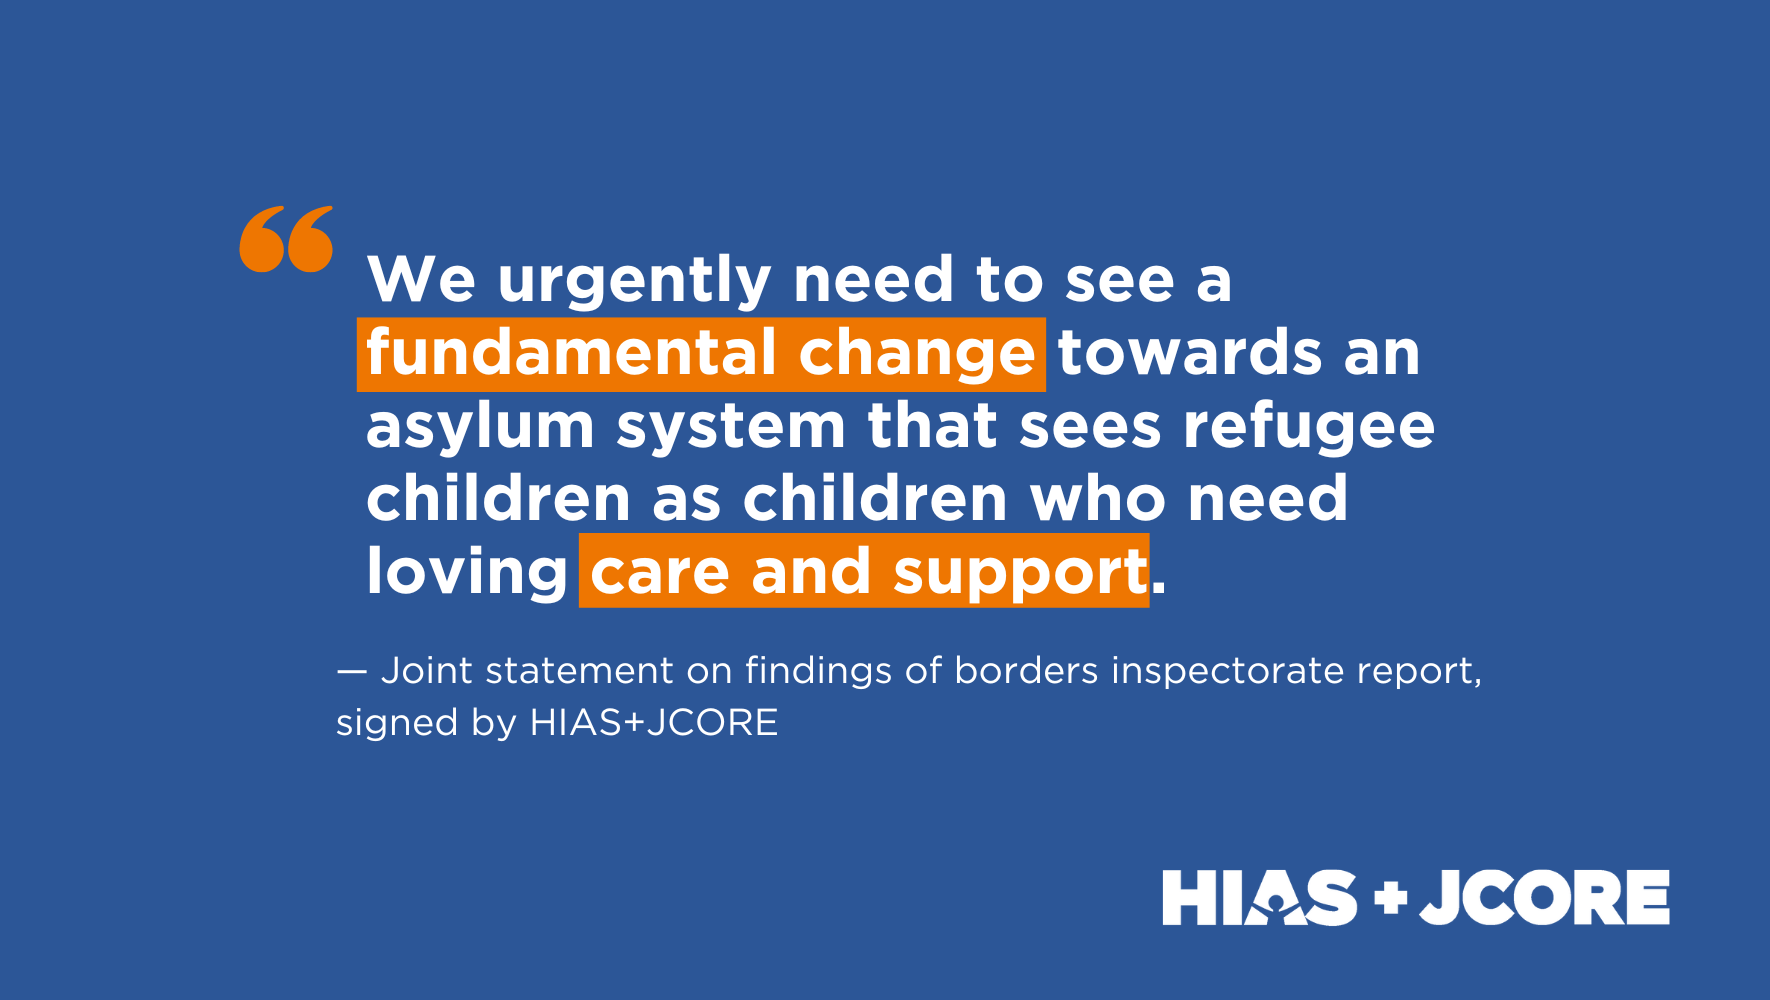 “We urgently need an asylum system that sees refugee children as children” – HIAS+JCORE sign joint statement on the findings of the borders inspectorate report